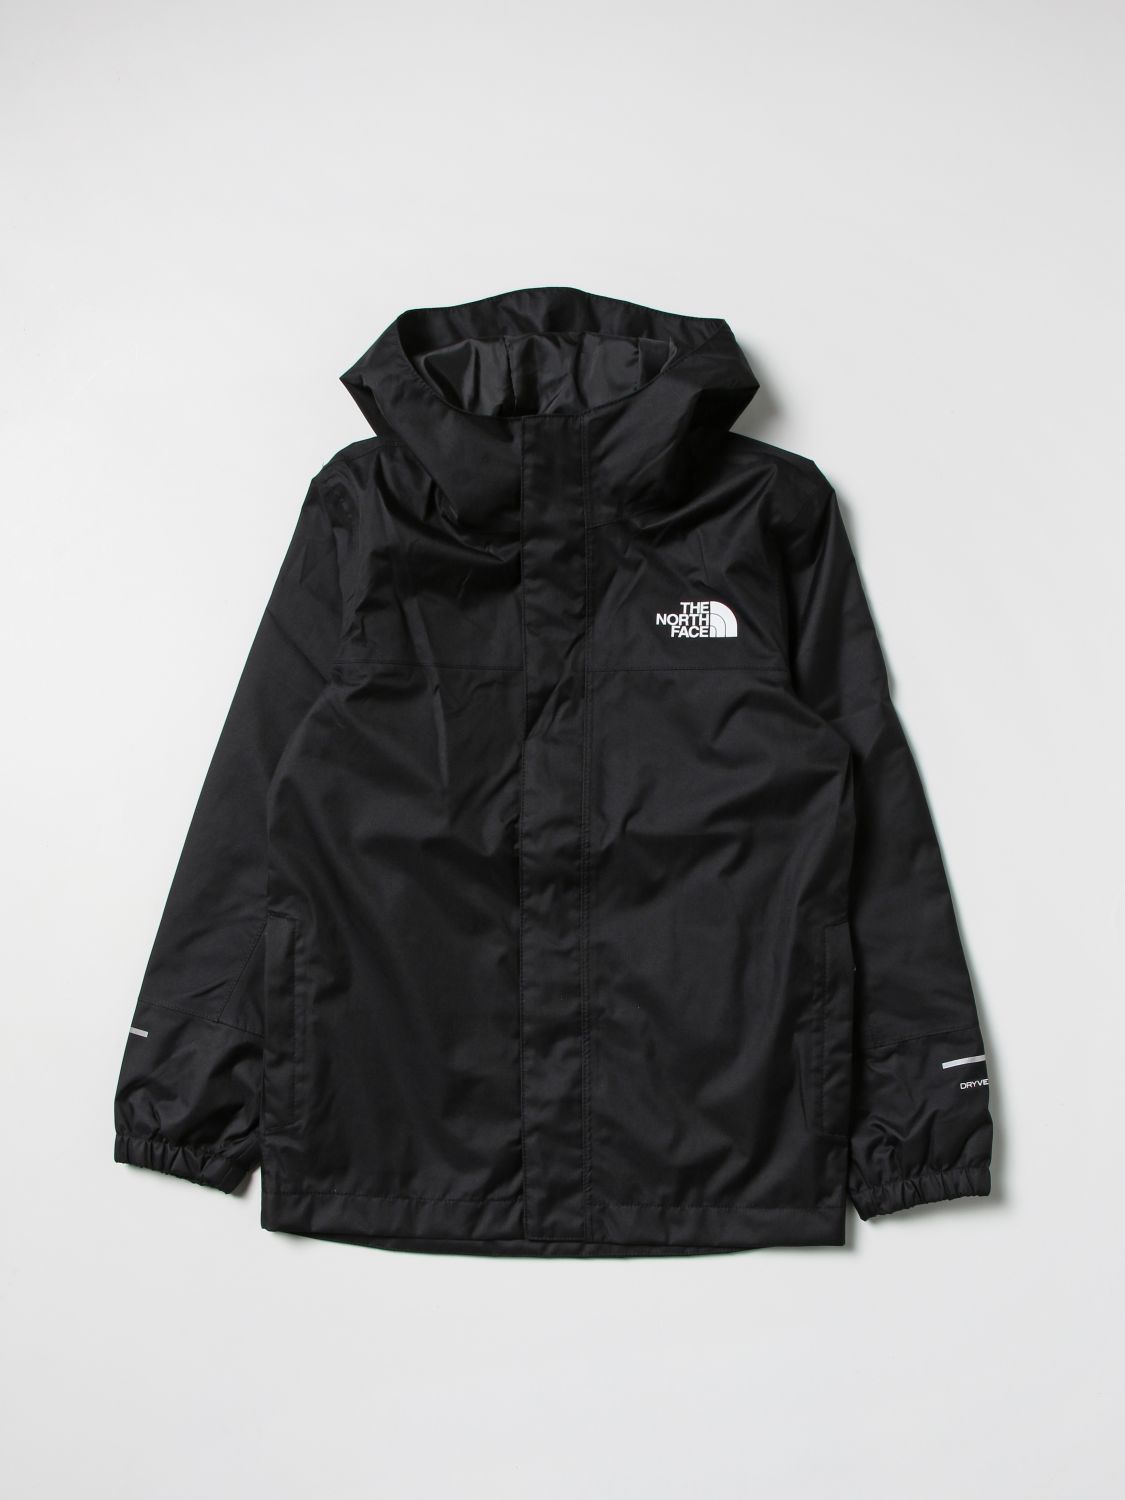 The North Face Jacket Kids In Black | ModeSens